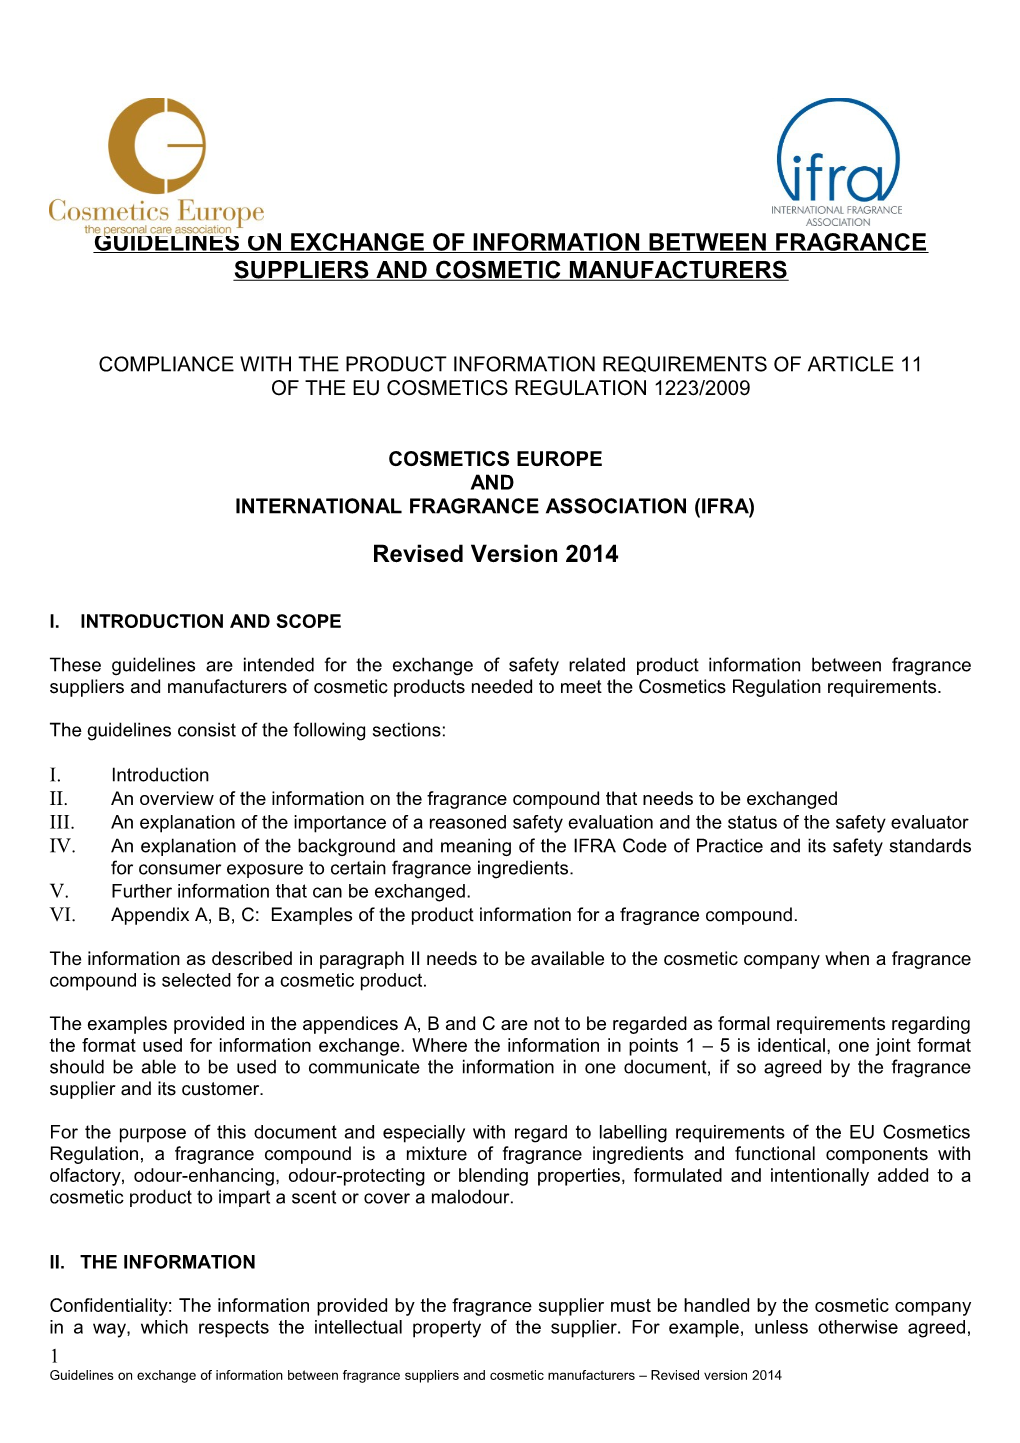 Guidelines on Exchange of Information Between Fragrance Suppliers and Cosmetic Manufacturers